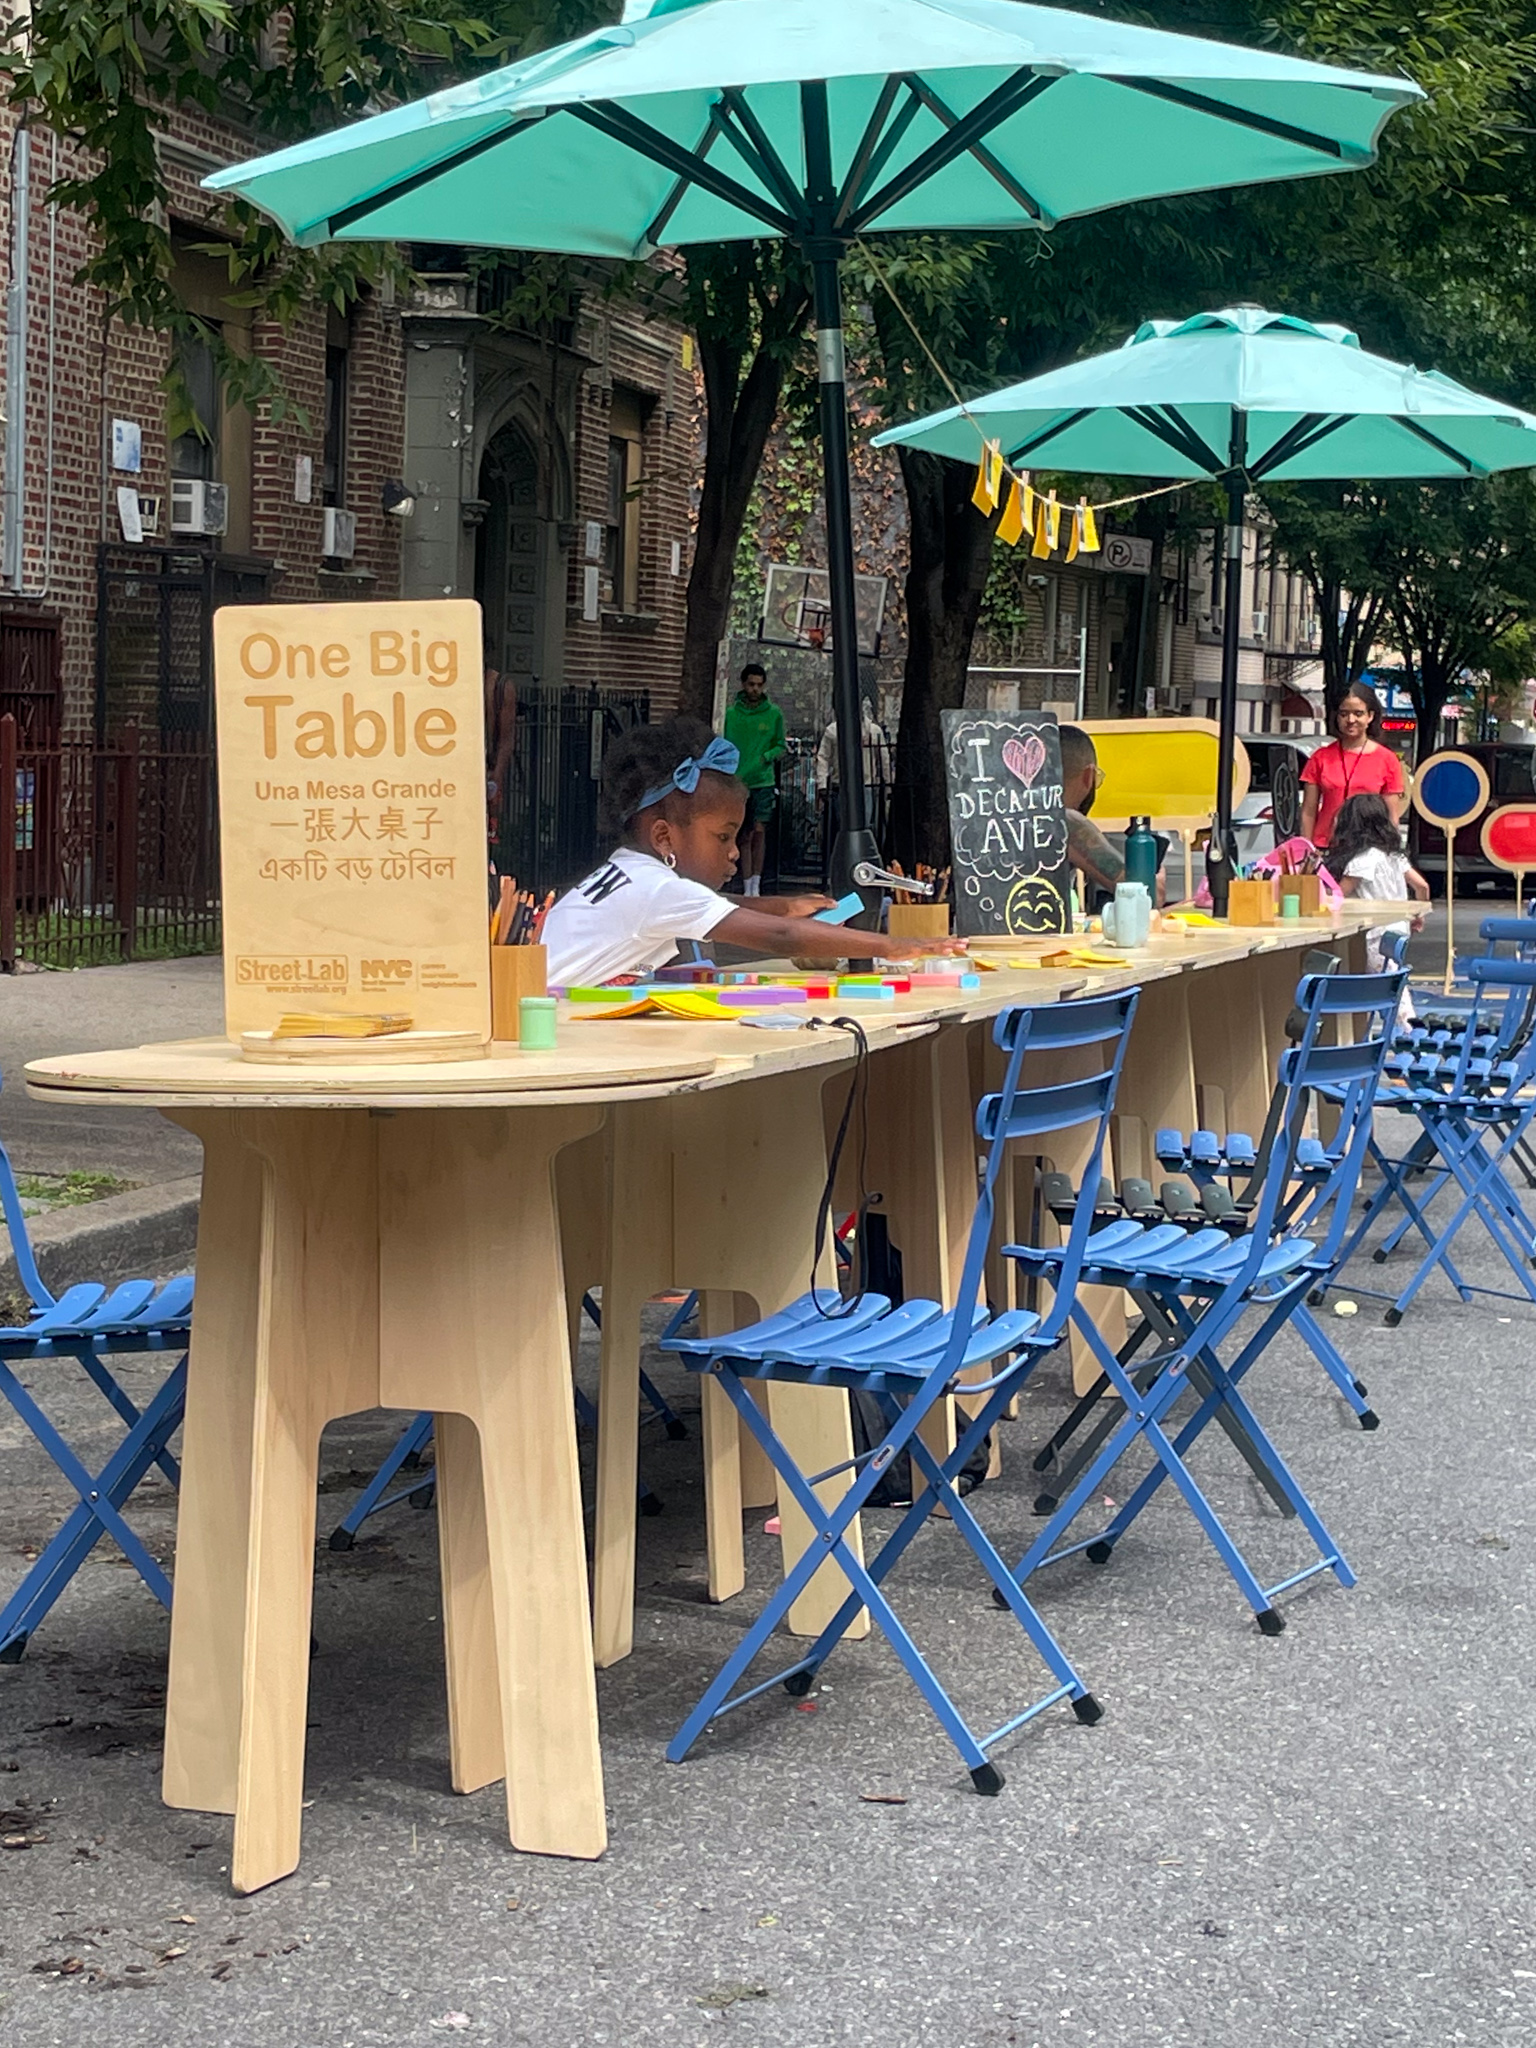 A little girl at a long table outside in a street of NYC.